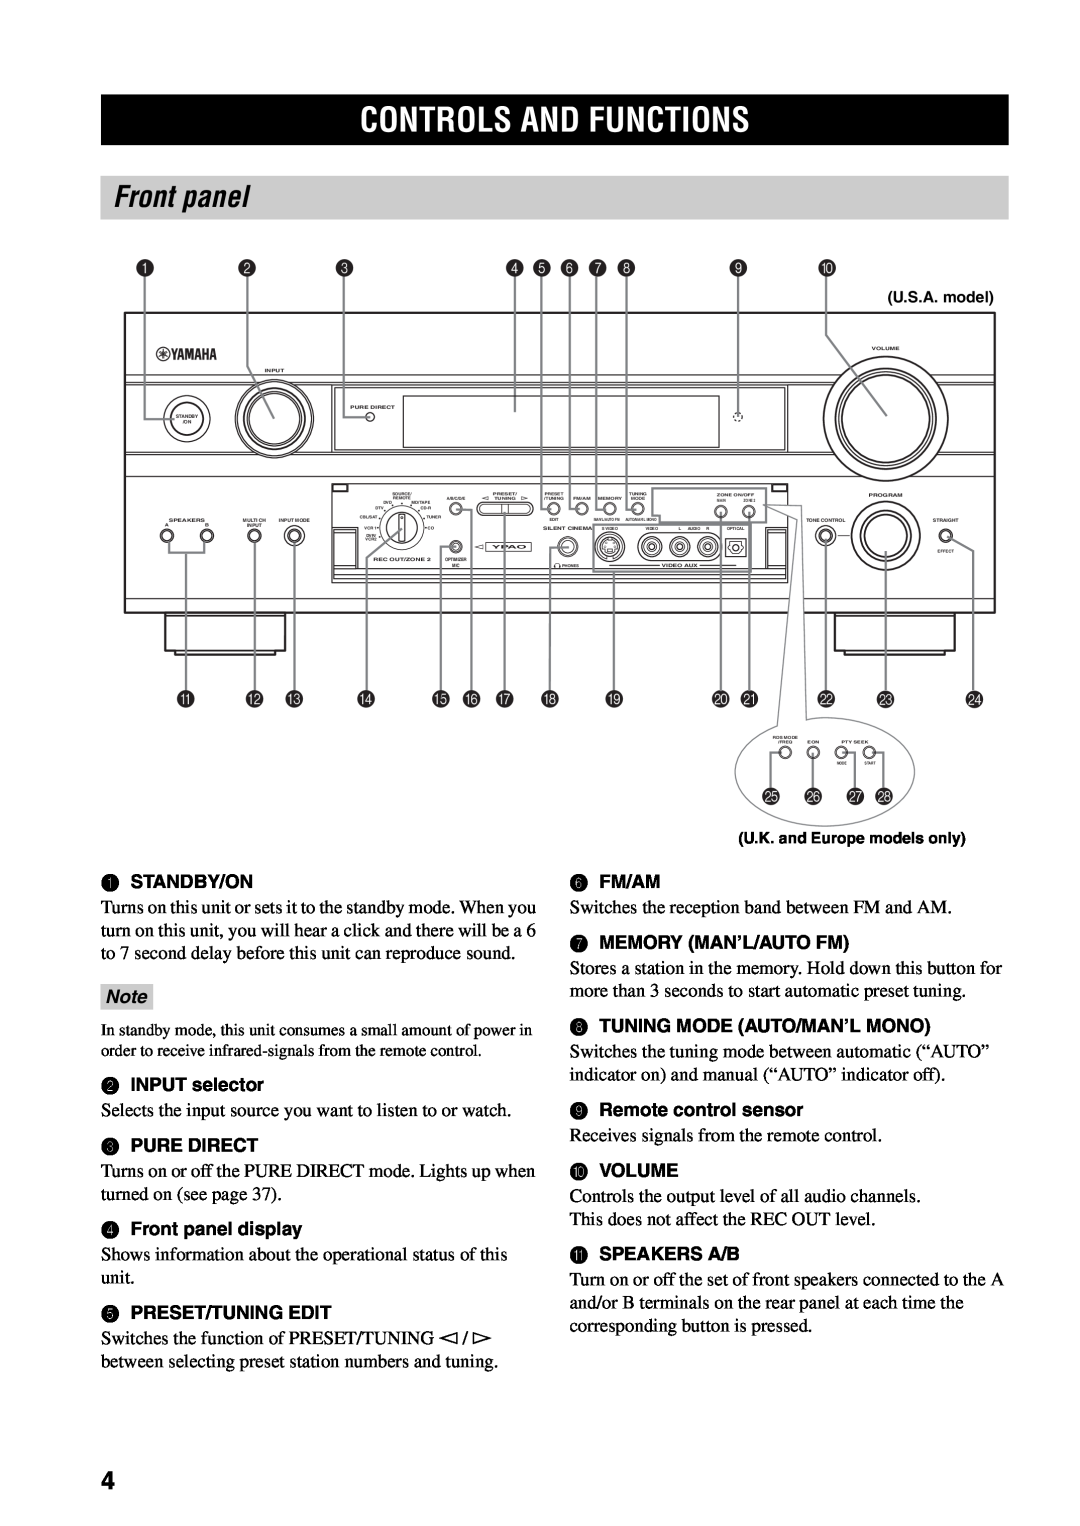 Yamaha RX-V2500 Controls And Functions, Front panel, 4 5 6, A B C D E F G H, 1STANDBY/ON, 2INPUT selector, 3PURE DIRECT 